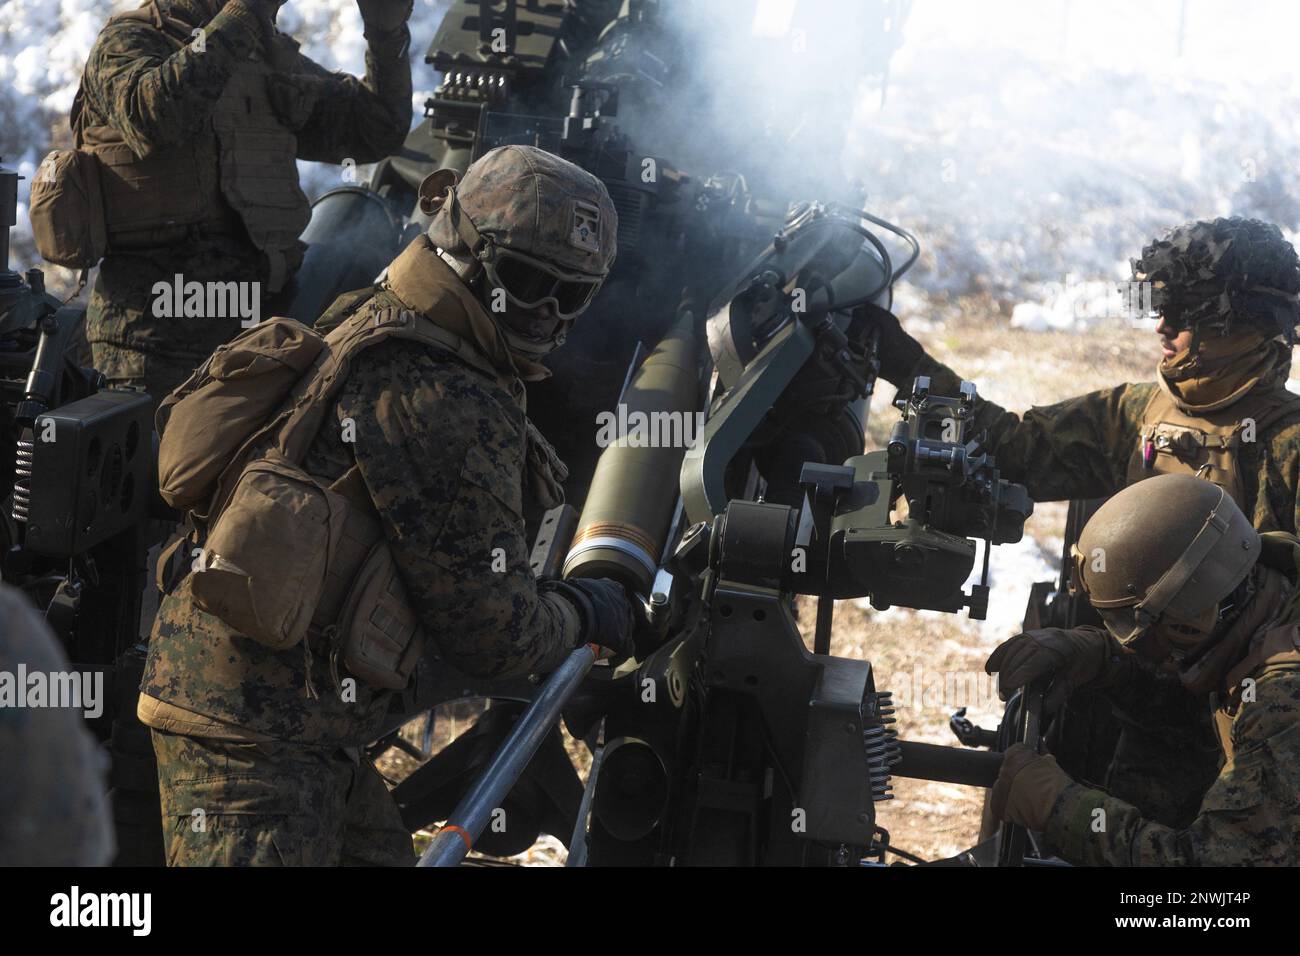 U.S. Marine Corps Lance Cpl. Terrence Hinton, a field artillery cannoneer with 3d Battalion, 12th Marines, reloads an M777 towed 155 mm howitzer while conducting live-fire training during Artillery Relocation Training Program 22.4 at the Yausubetsu Maneuver Area, Hokkaido, Japan, Jan. 30, 2023. The skills developed at ARTP increase the proficiency and readiness of the only permanently forward-deployed artillery unit in the Marine Corps, enabling them to provide precision indirect fires. Hinton is a native of Los Angeles, California. Stock Photo